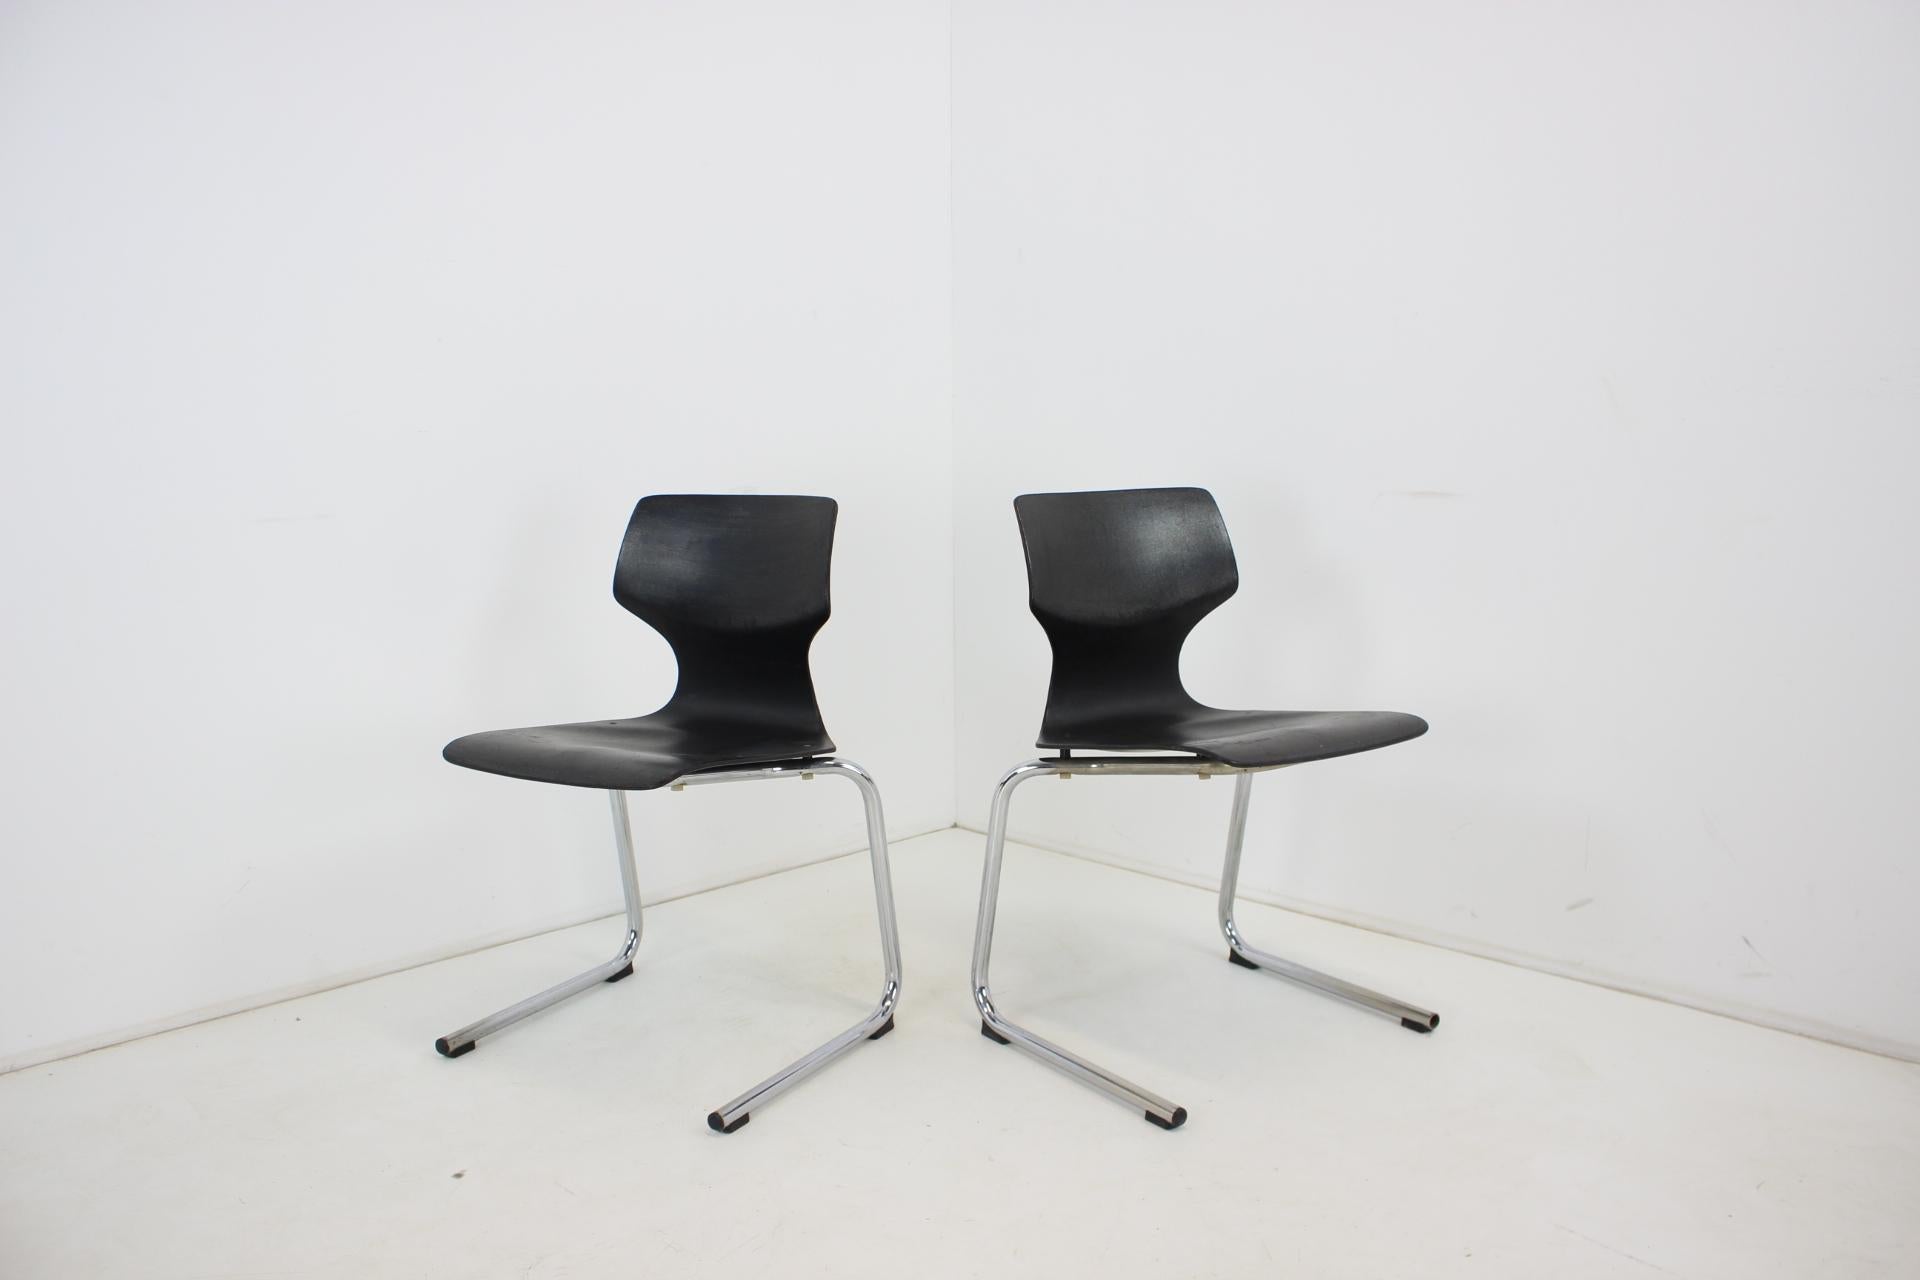 Good original condition with signs of use.
Made in Germany.
Marked with the number 1410-20.
Measures: Seat hight 47cm.